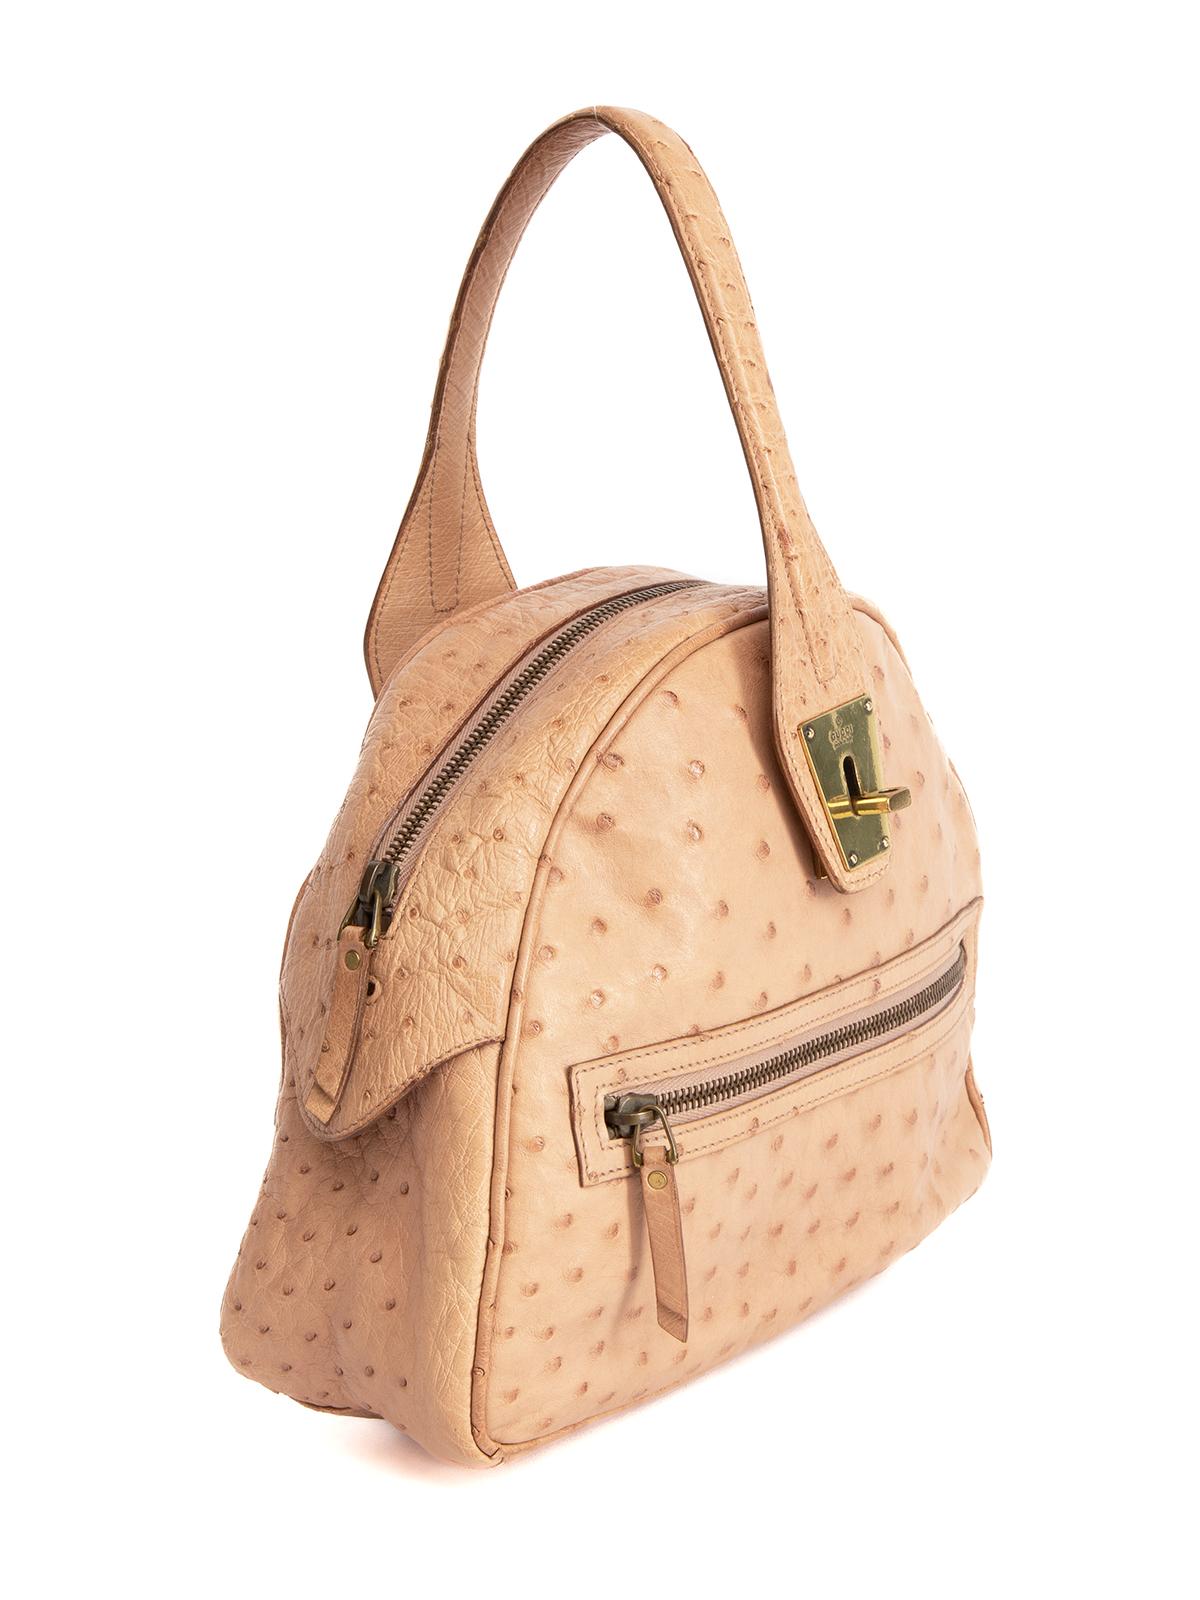 CONDITION is Very good. Minimal wear to bag is evident. Minimal wear to Leather exterior and gold hardware on this used Gucci designer resale item. Details Brown, beige Leather Top handle bag Single handle Gold tone hardware Turn lock fastening